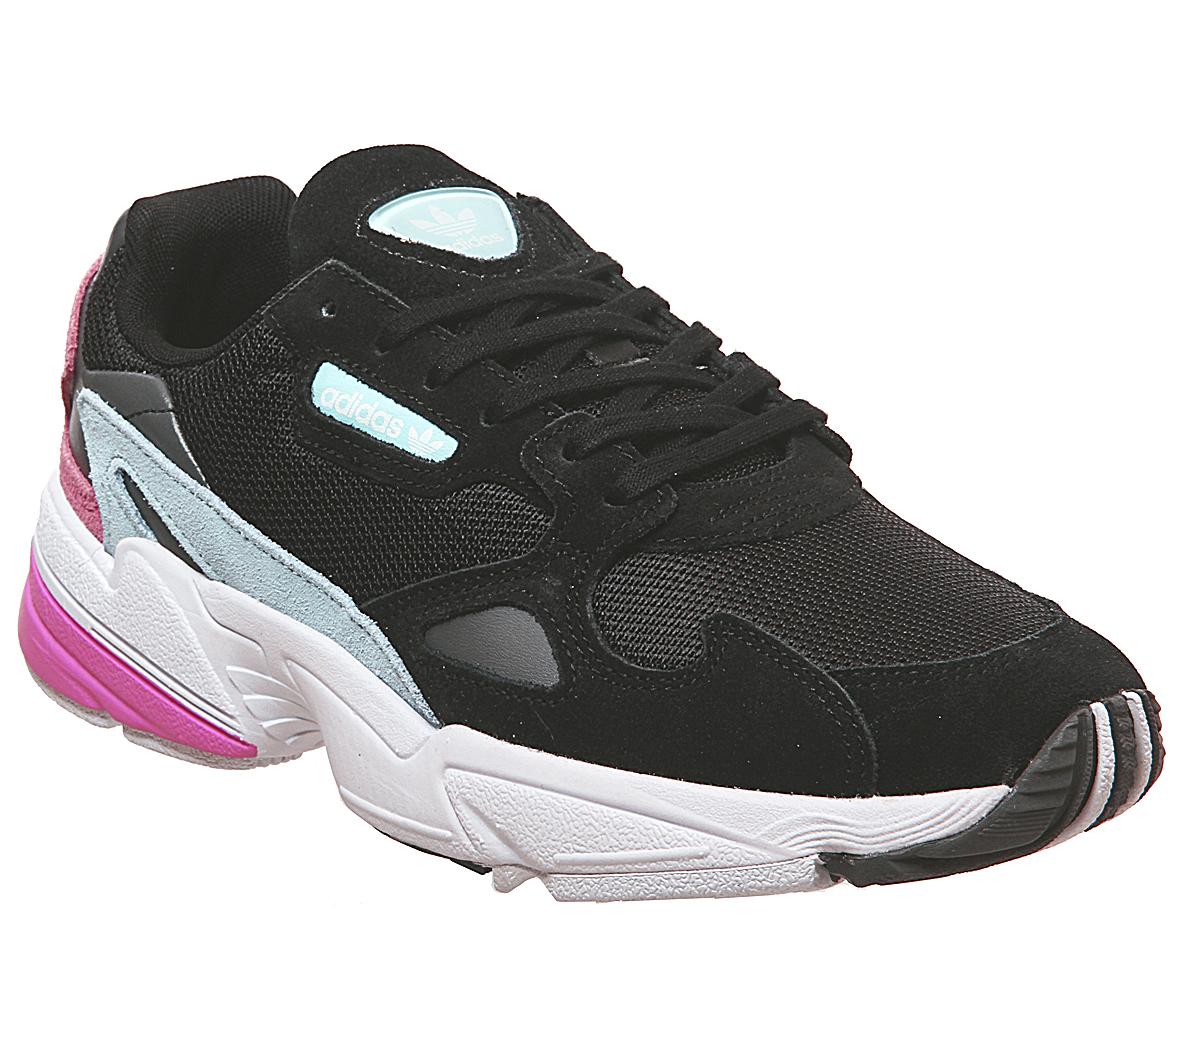 adidas falcon pink and blue